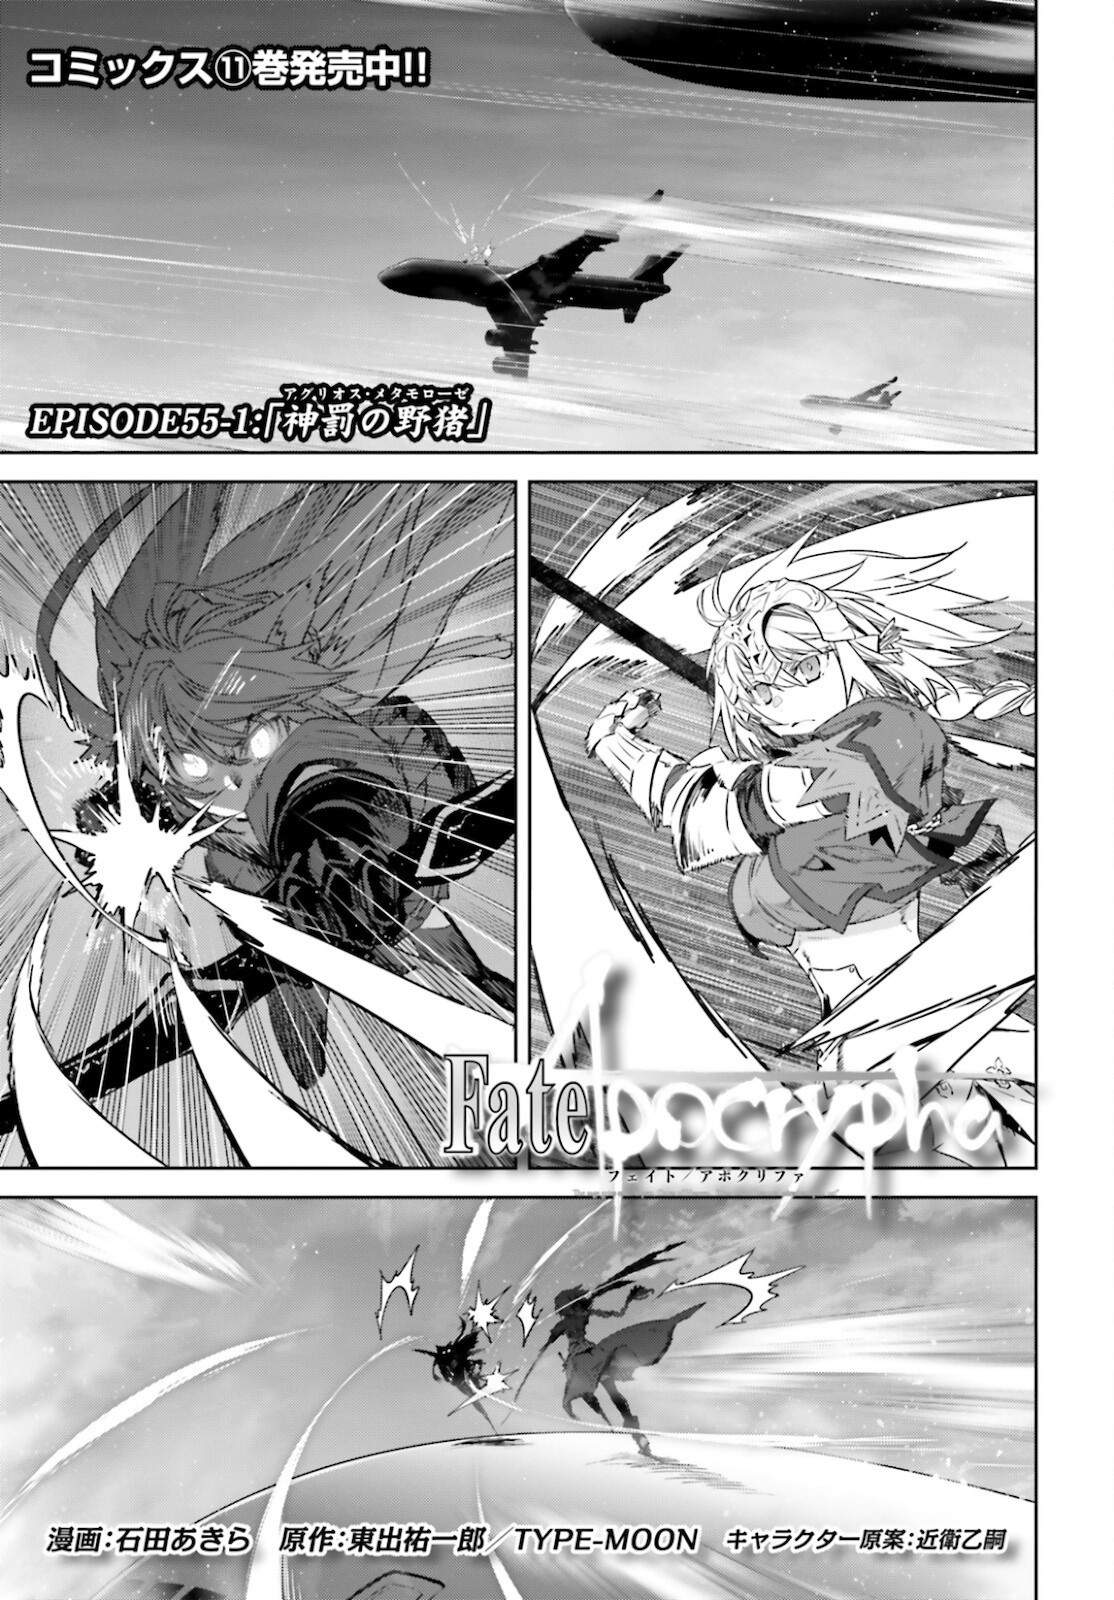 Fate-Apocrypha - Chapter 55-1 - Page 1